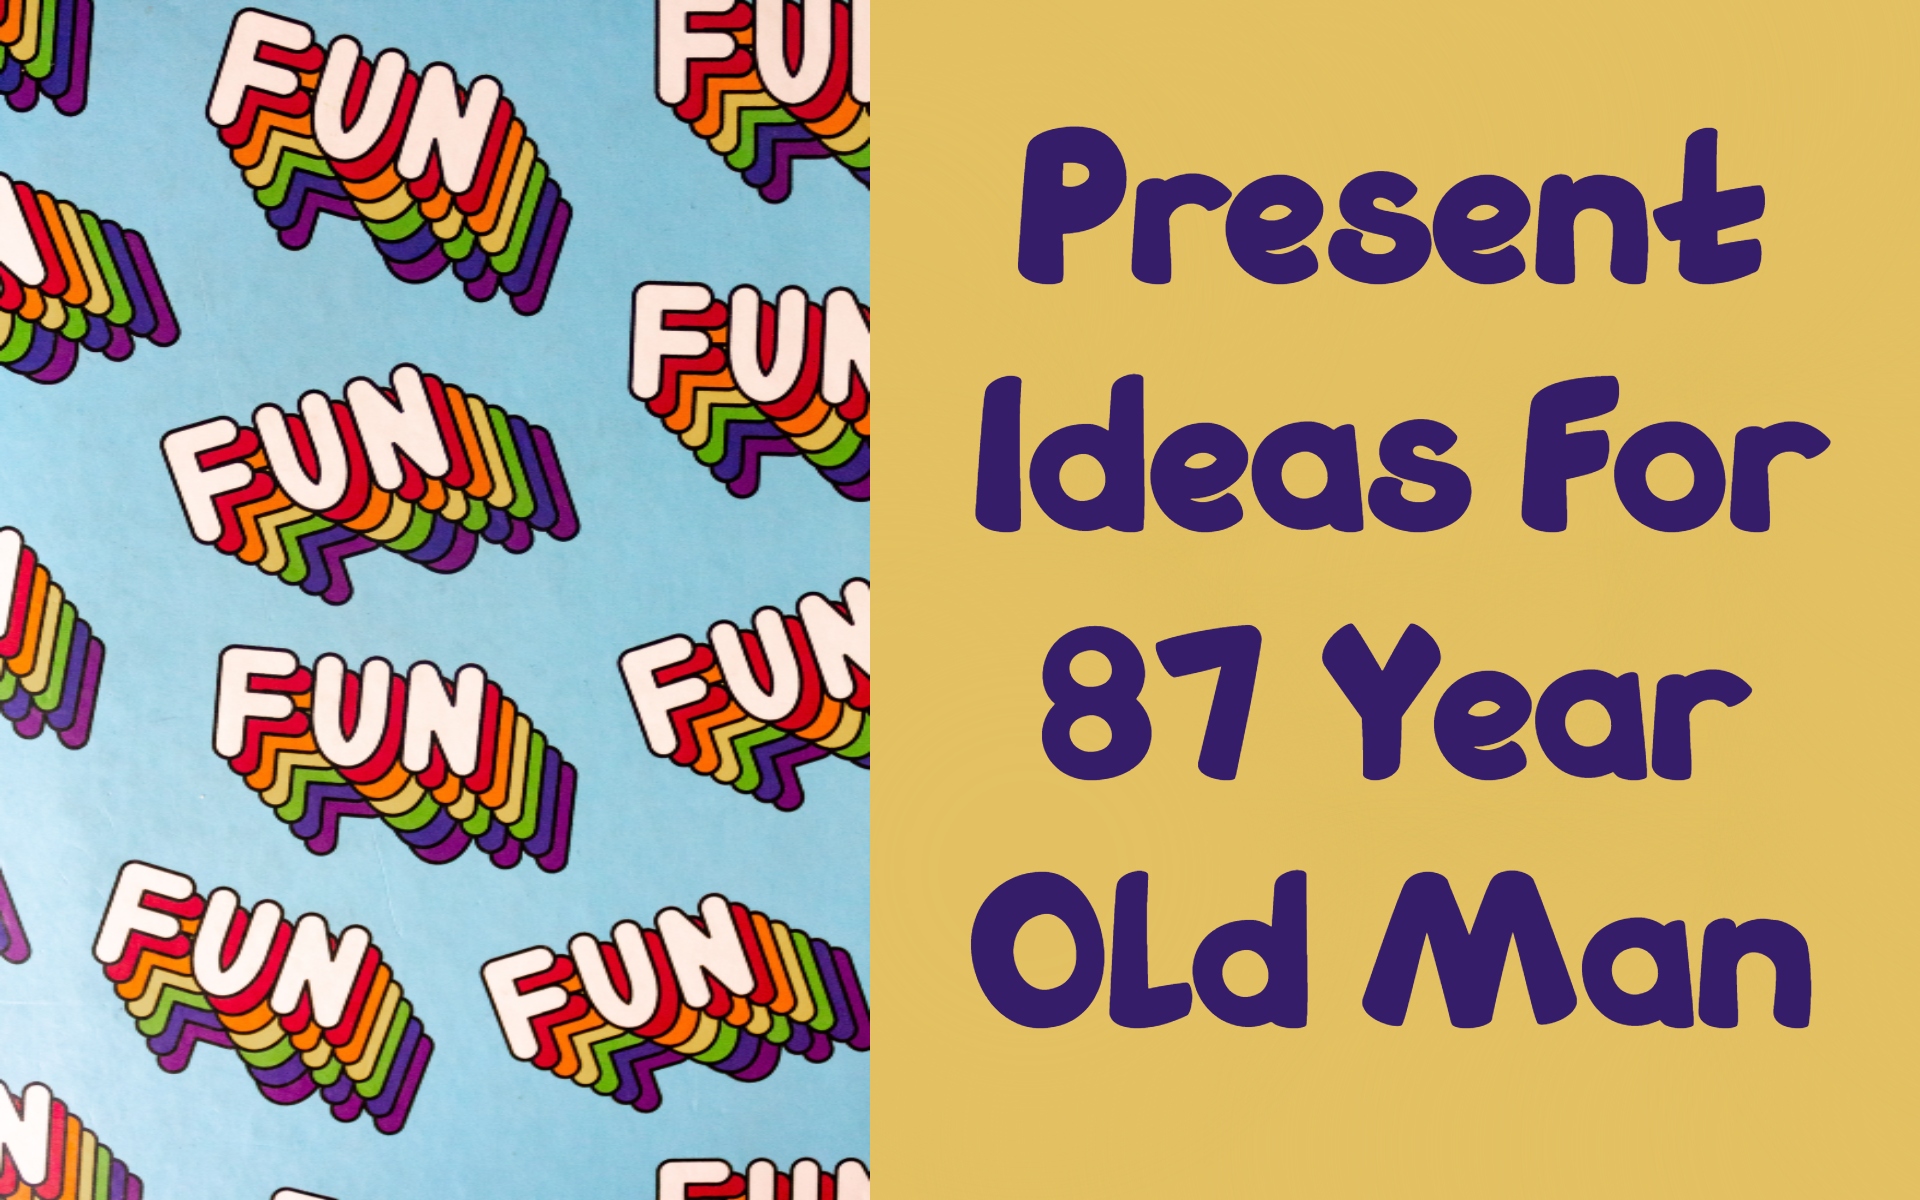 Cover image of gift ideas for 87-year-old man by Giftsedge